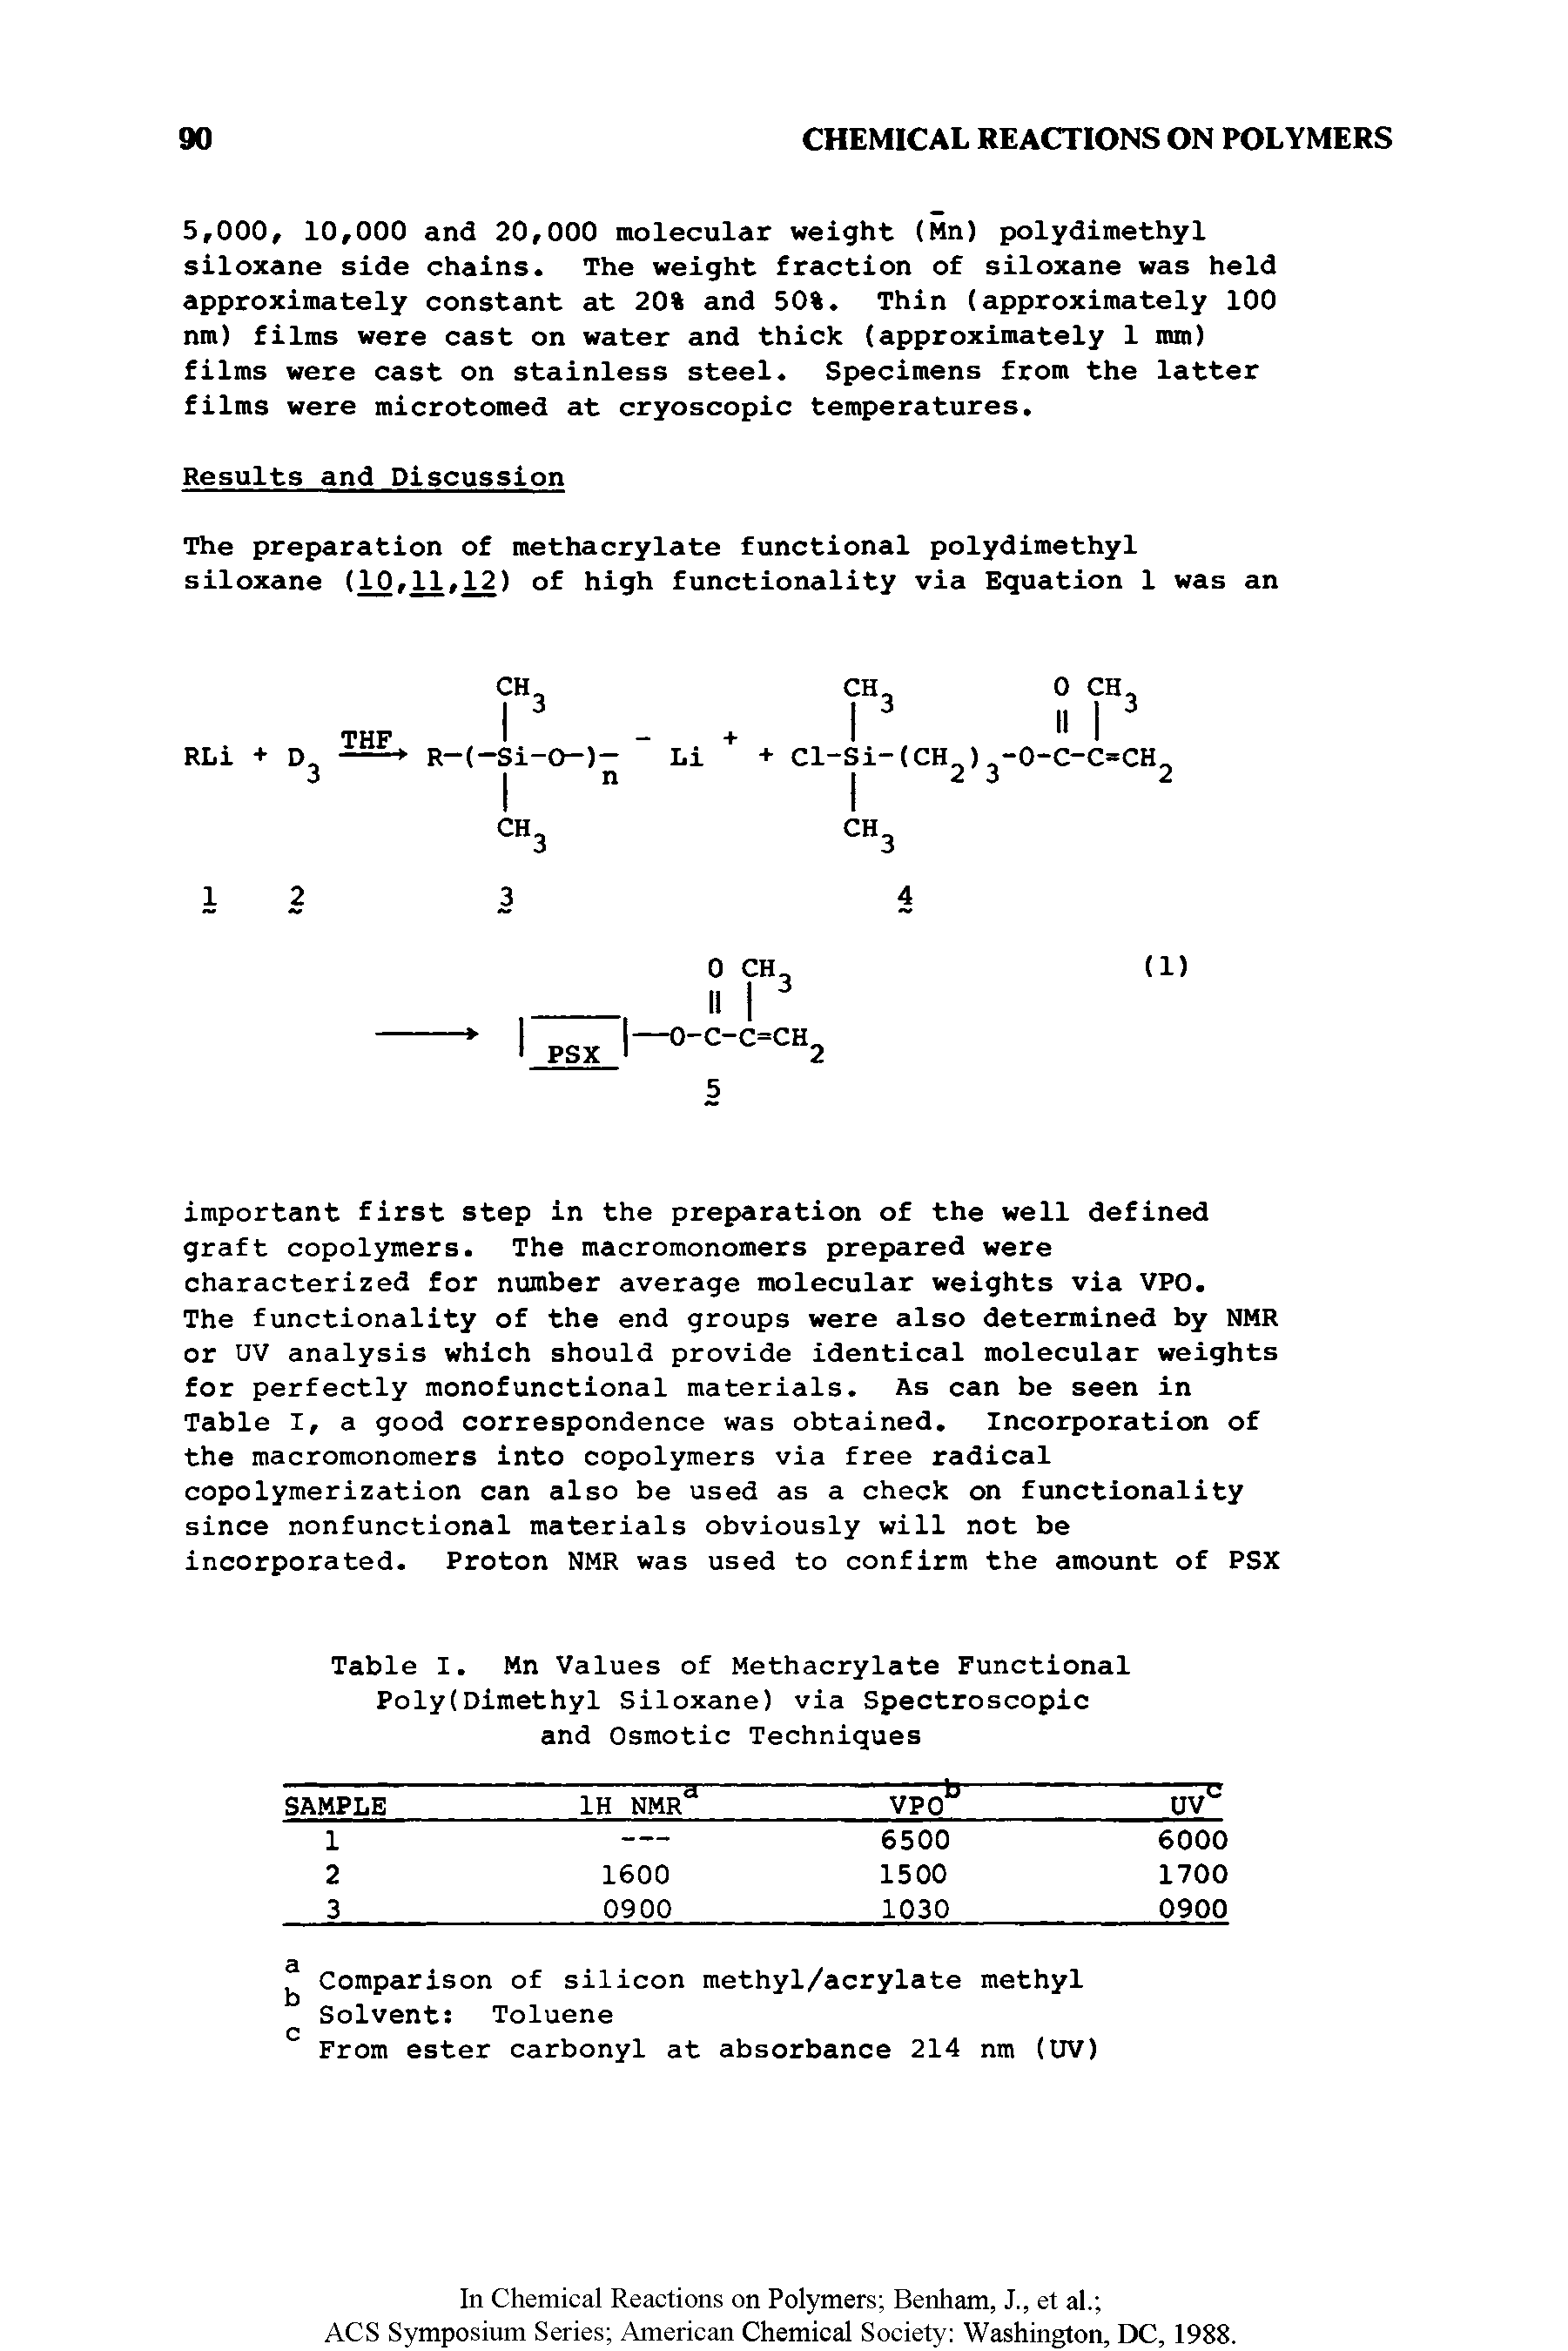 Table I. Mn Values of Methacrylate Functional Poly(Dimethyl Siloxane) via Spectroscopic and Osmotic Techniques...